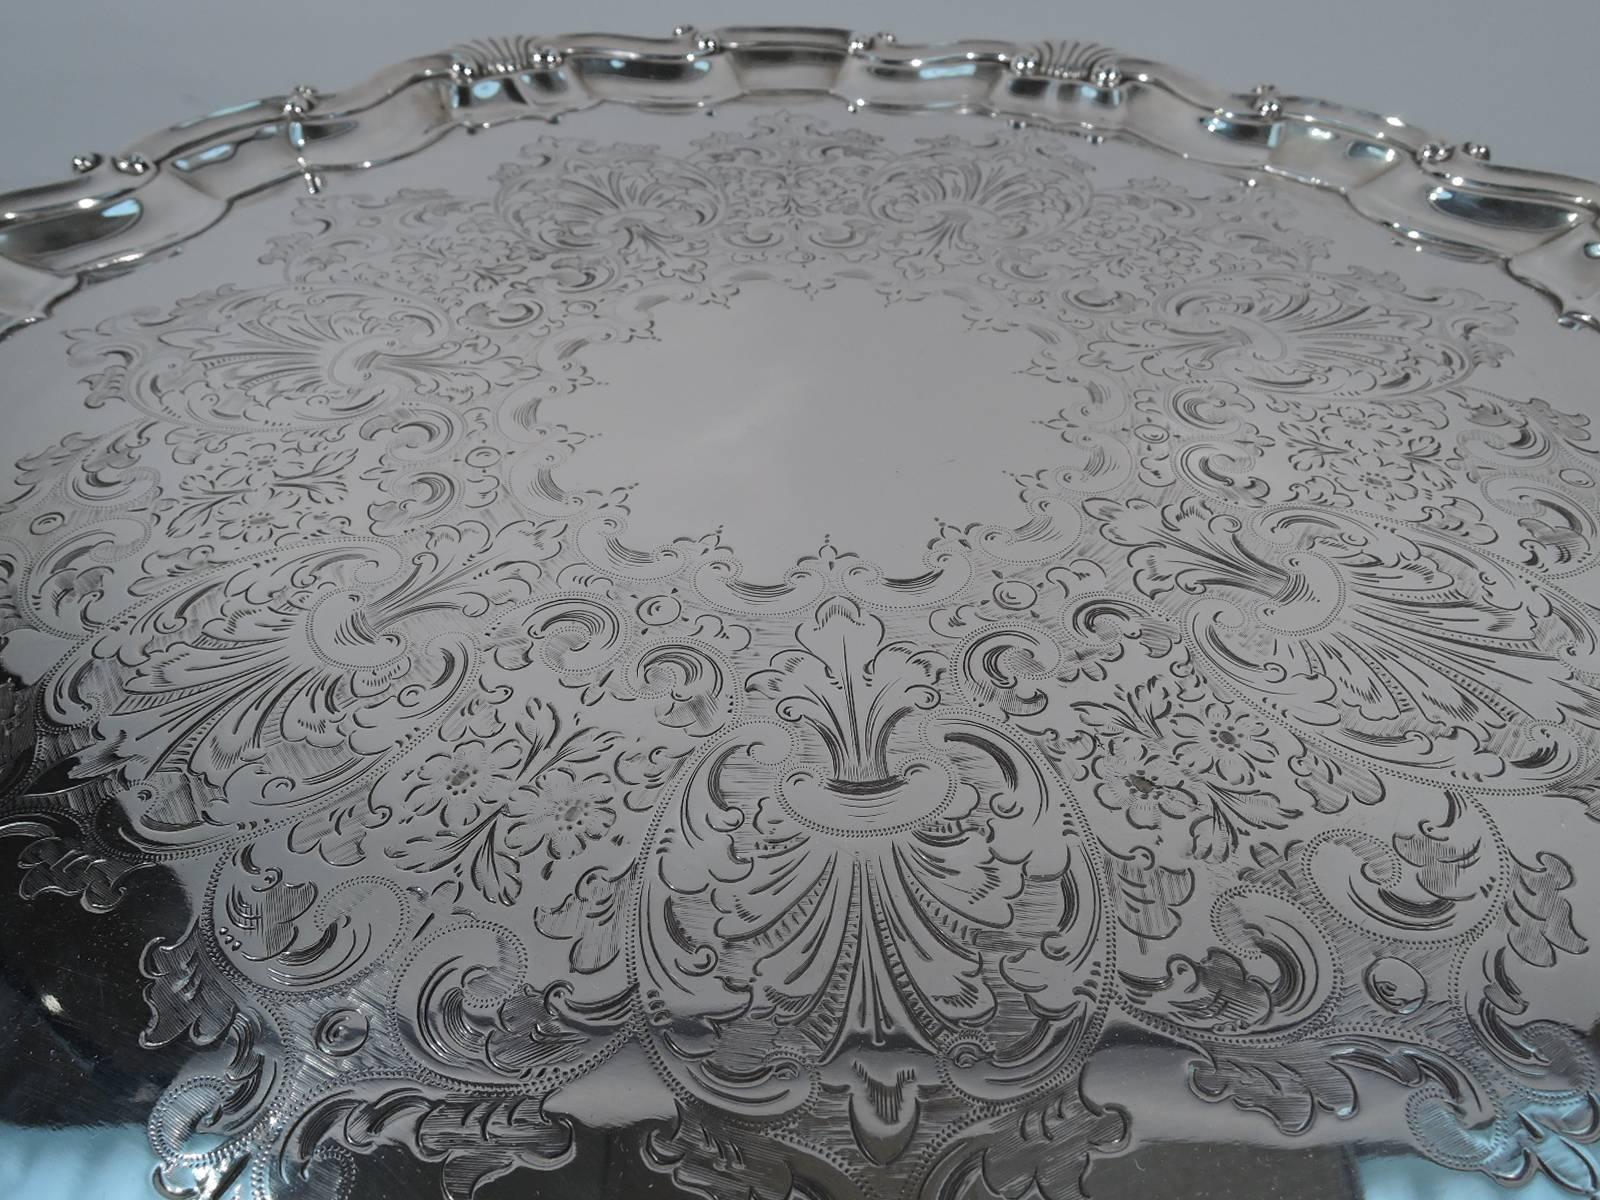 Edwardian sterling silver salver. Made by Marples & Co. (a subsidiary of Martin, Hall) in Sheffield in 1904. Molded rim has alternating ‘C’ and ‘S’ scrolls interspersed with scallop shells. Central scalloped frame (vacant) surrounded by engraved